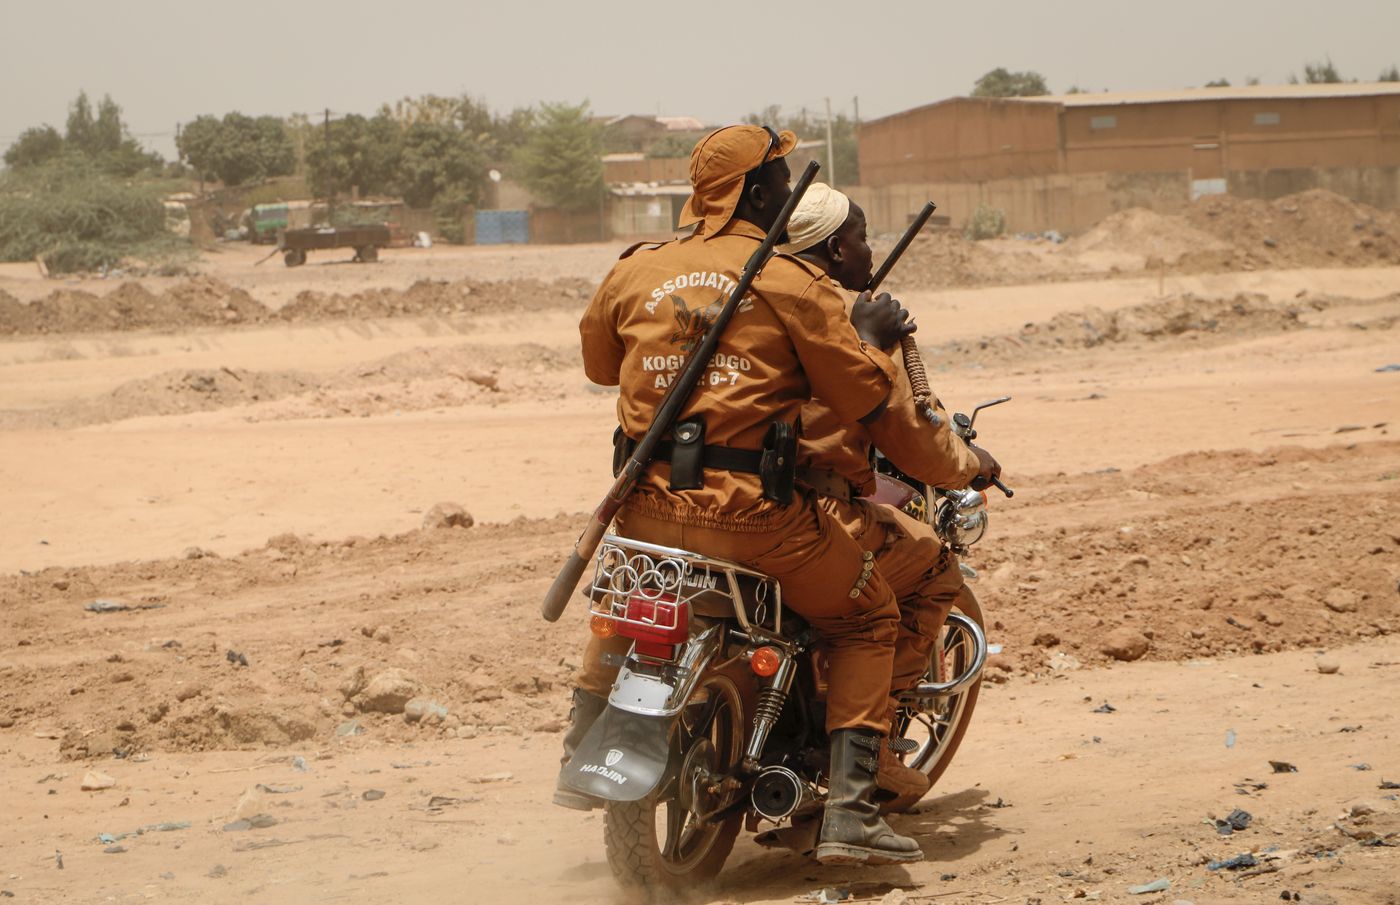 Local defence force volunteers ride on a motorbike through Ouagadougou, part of Burkina Faso's initiative to recruit civilians in combating jihadist violence, March 14, 2020.